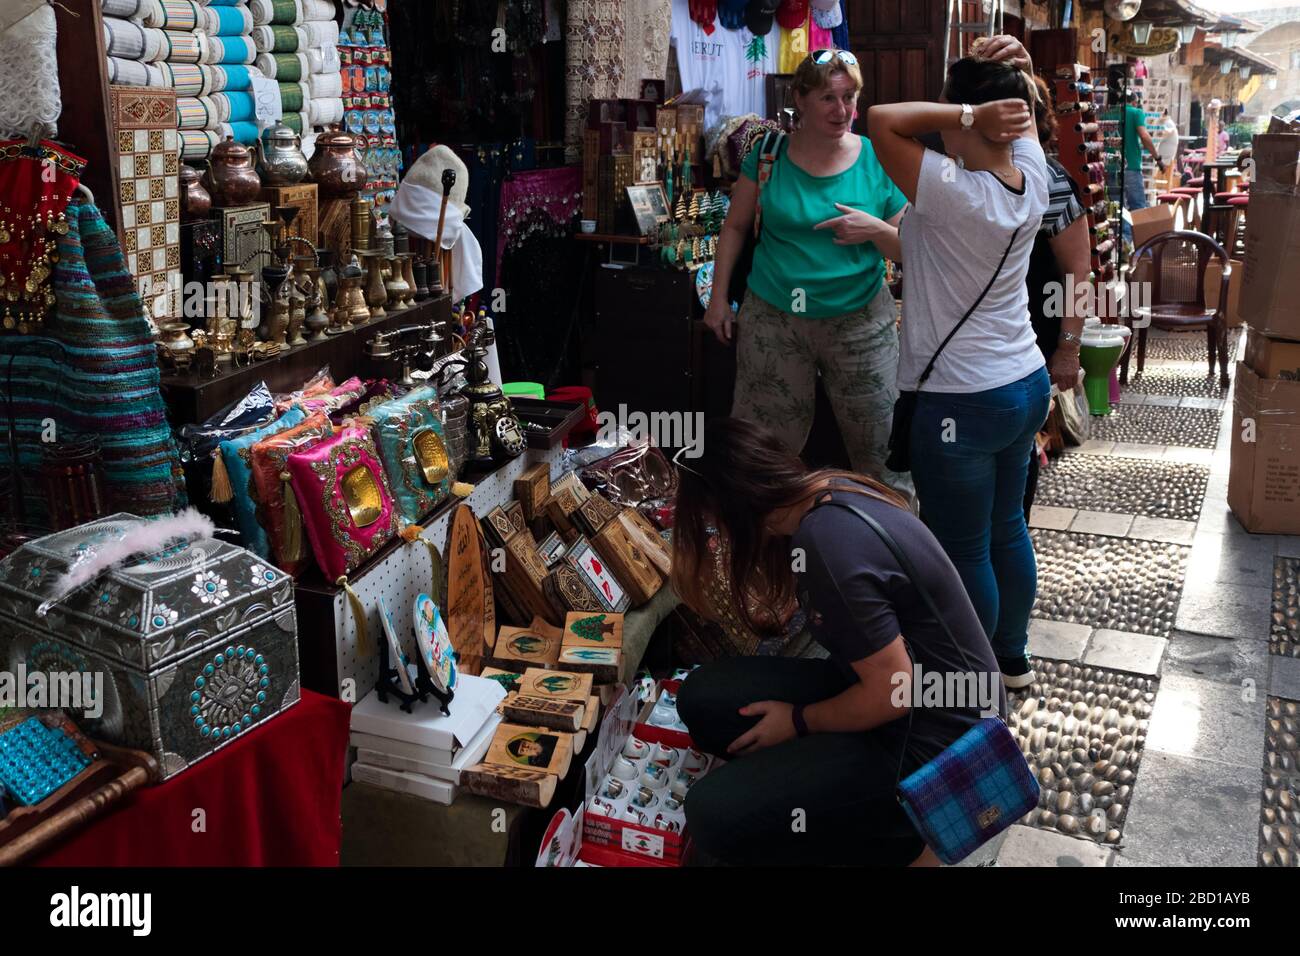 Byblos, Lebanon - May 12, 2017: Foreign travellers visiting a souvenir shops at Byblos souks. Stock Photo